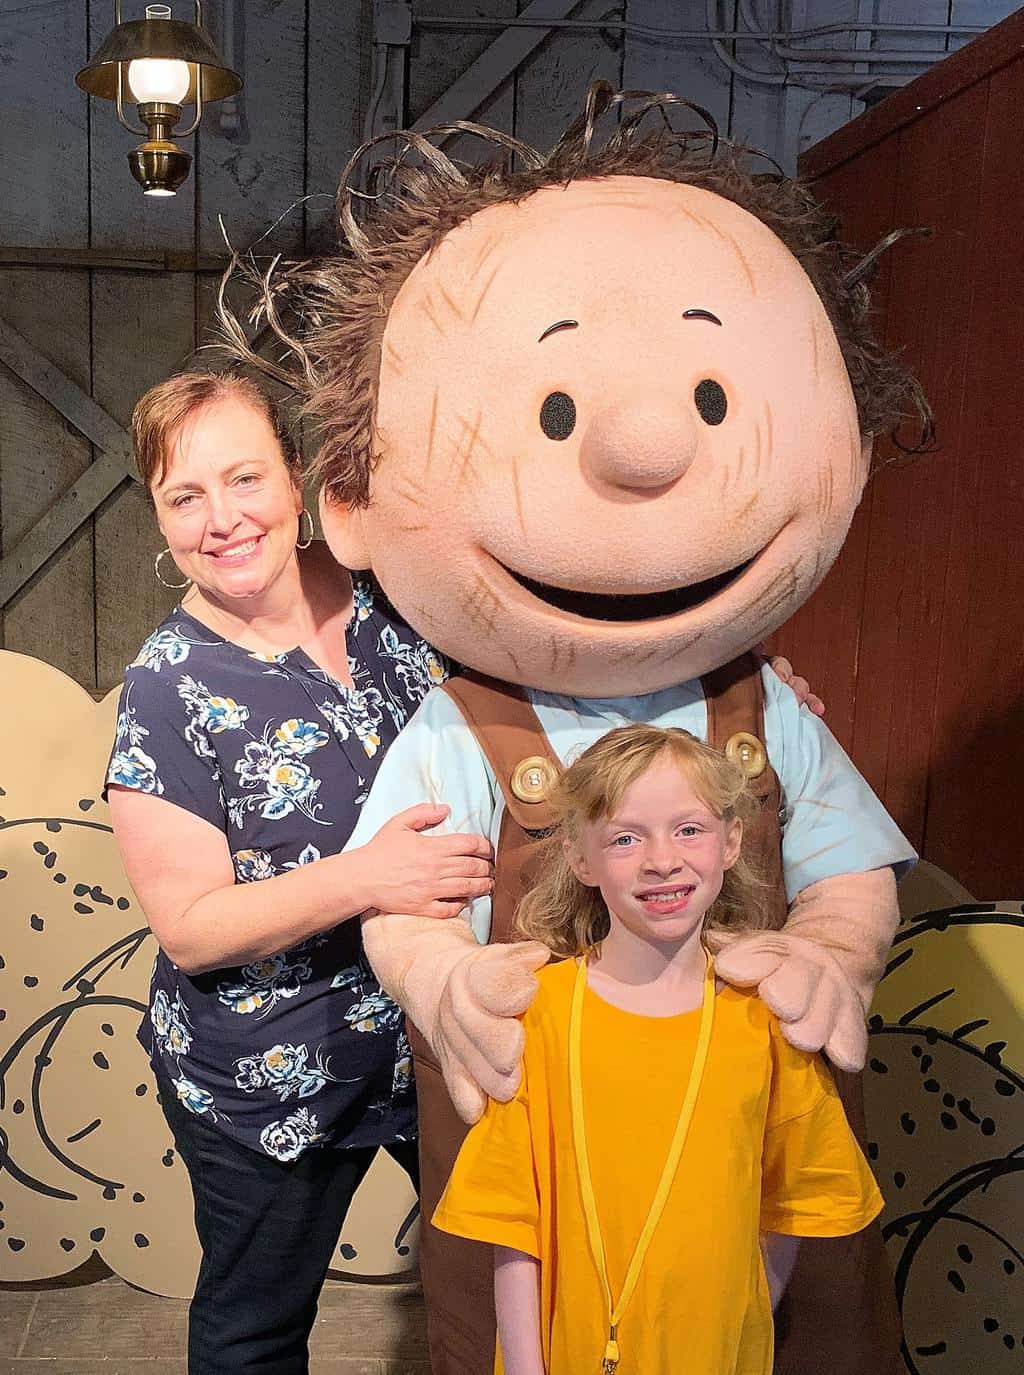 Are you a Snoopy fan? Attend the annual Knott's Berry Farm Peanuts Celebration every winter in Buena Park, California! From Snoopy inspired treats to live entertainment to meeting Pig Pen in the Livery Stable, there is something for every Snoopy fan.